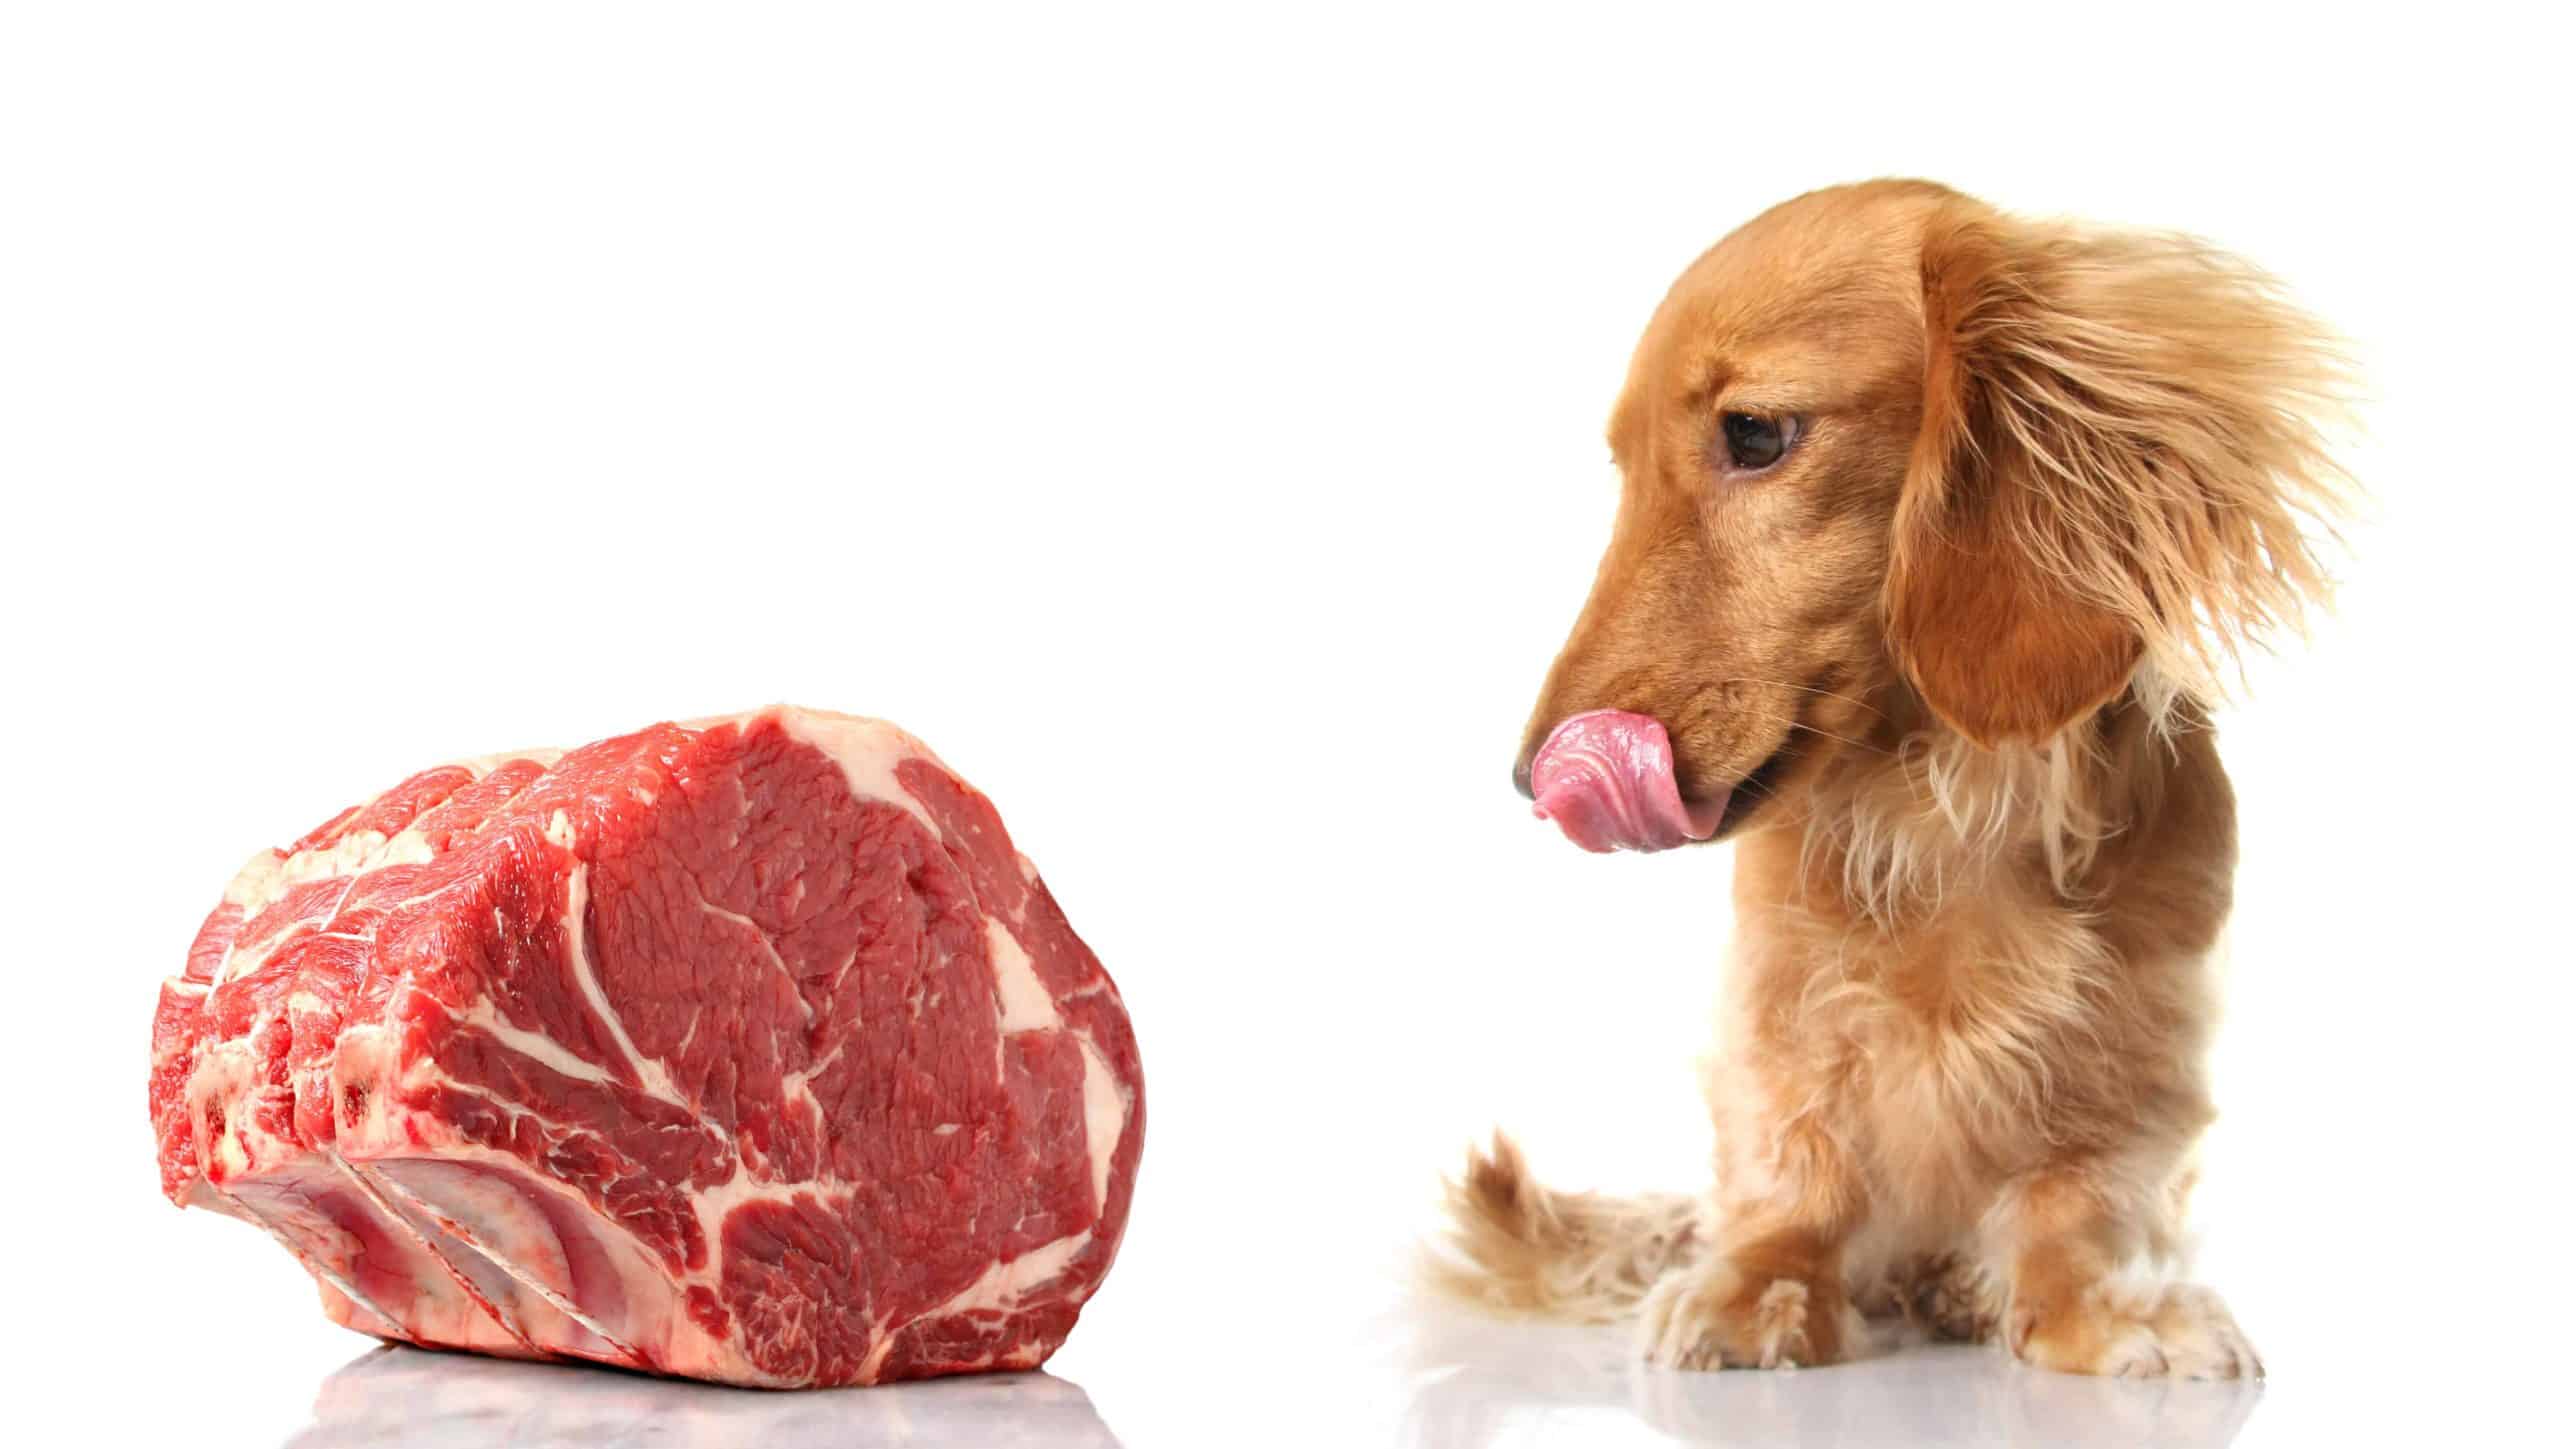 8 easy methods to cook beef for dogs - DogsBestLife.com